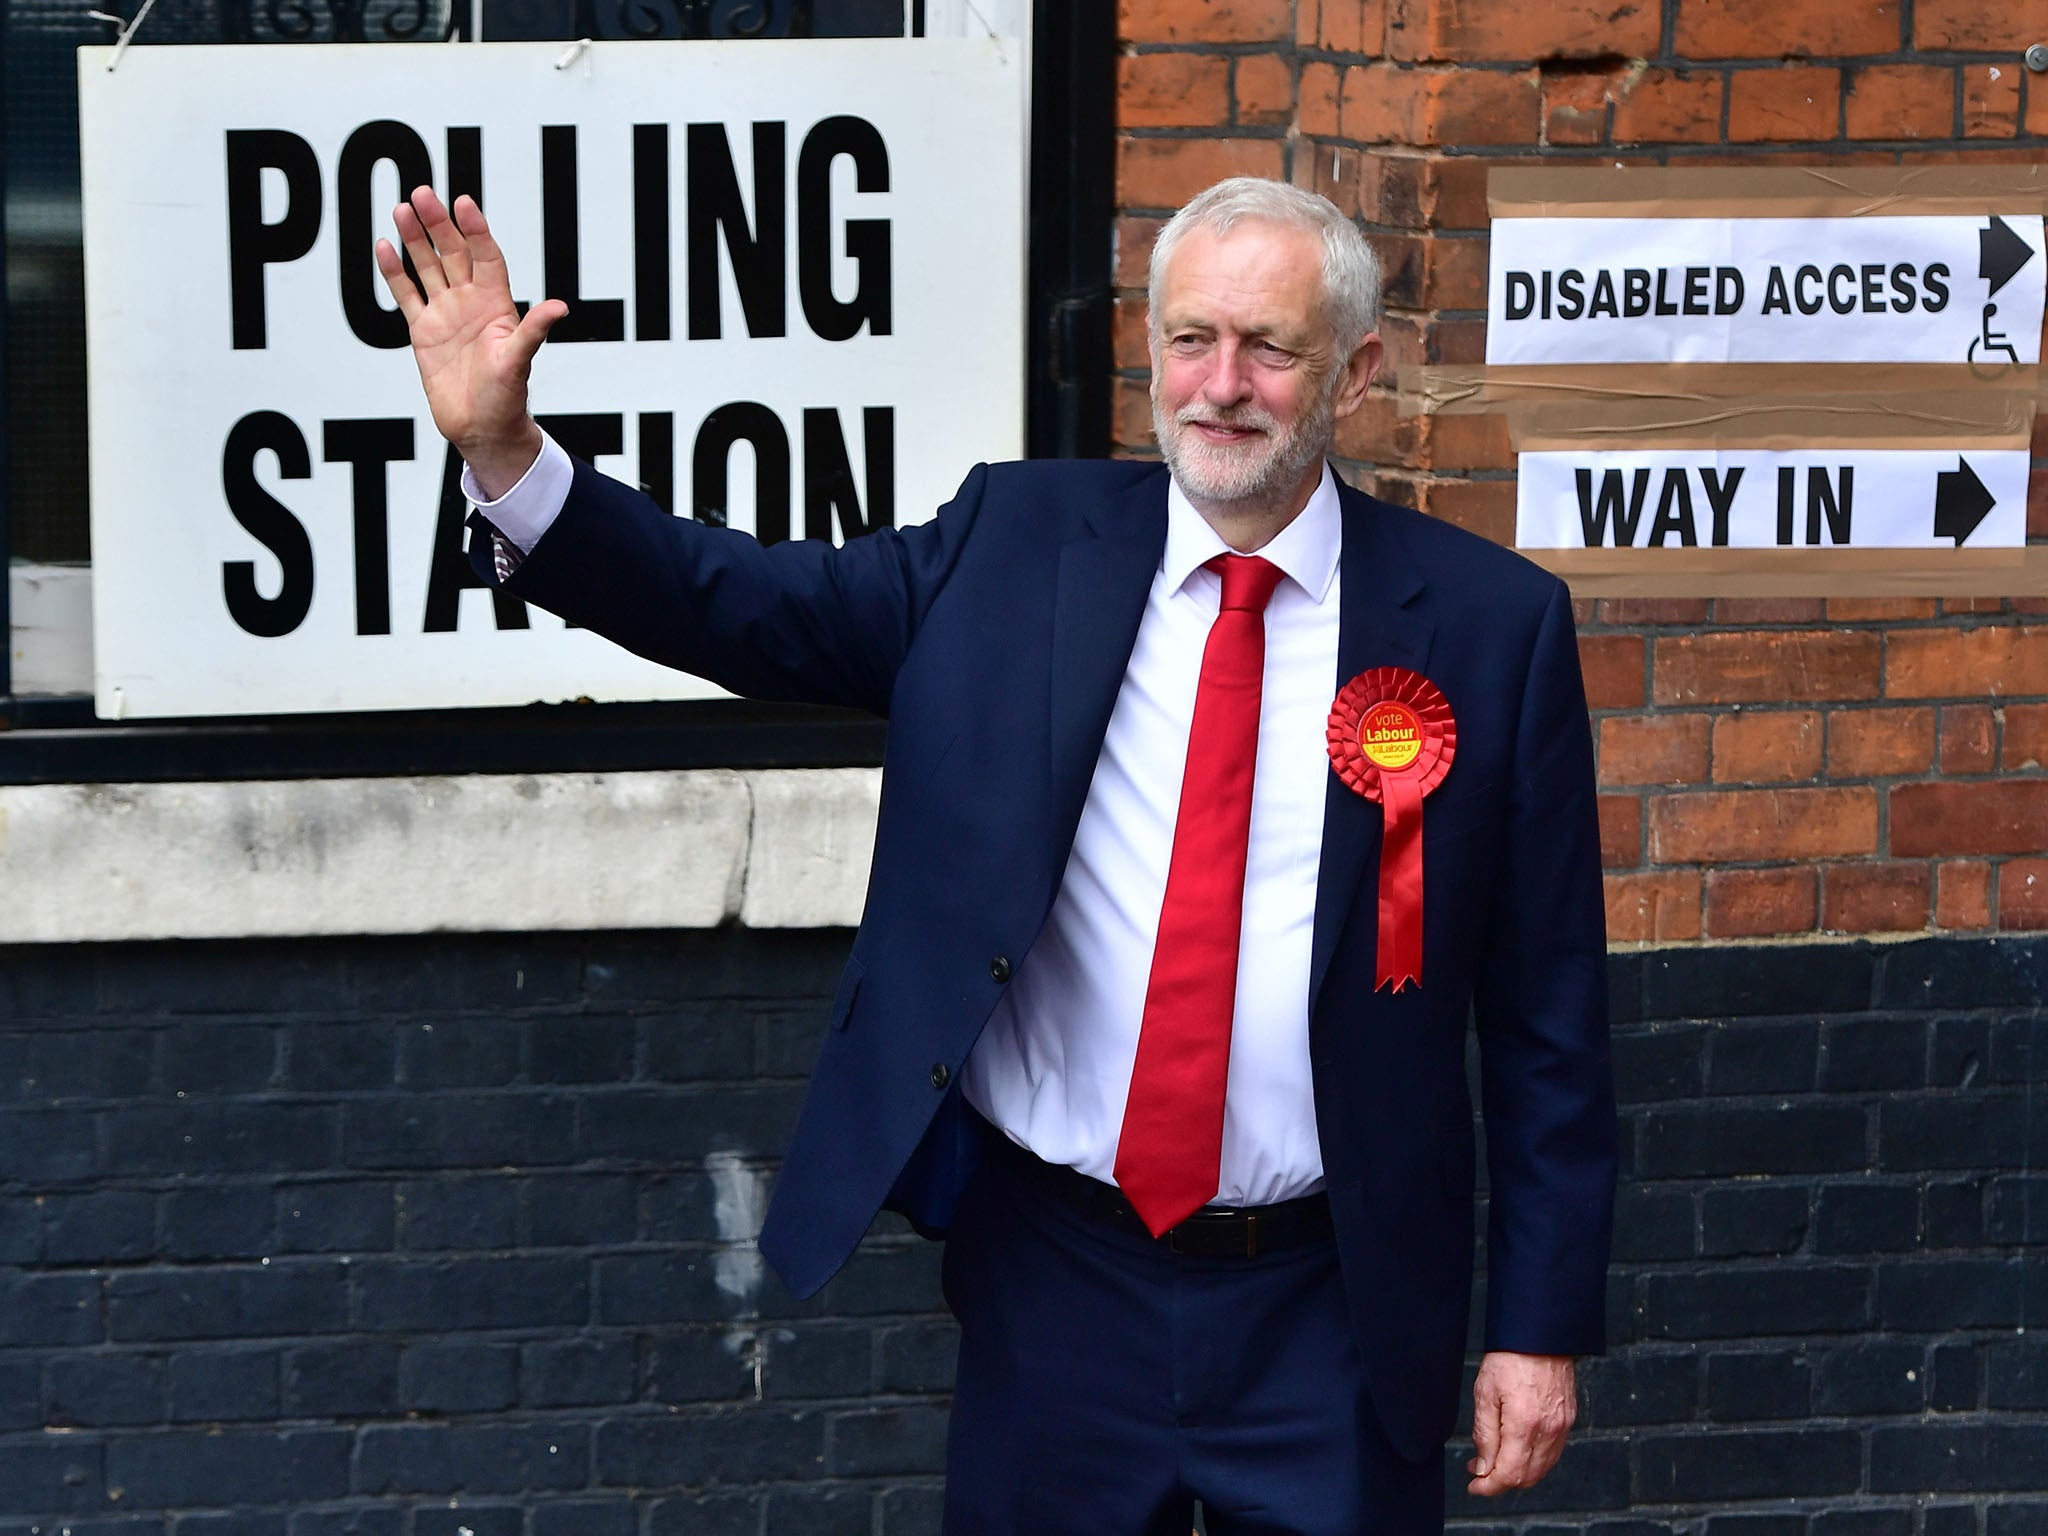 Jeremy Corbyn after casting his vote in the General Election at a polling station in Pakeman school in Islington, north London